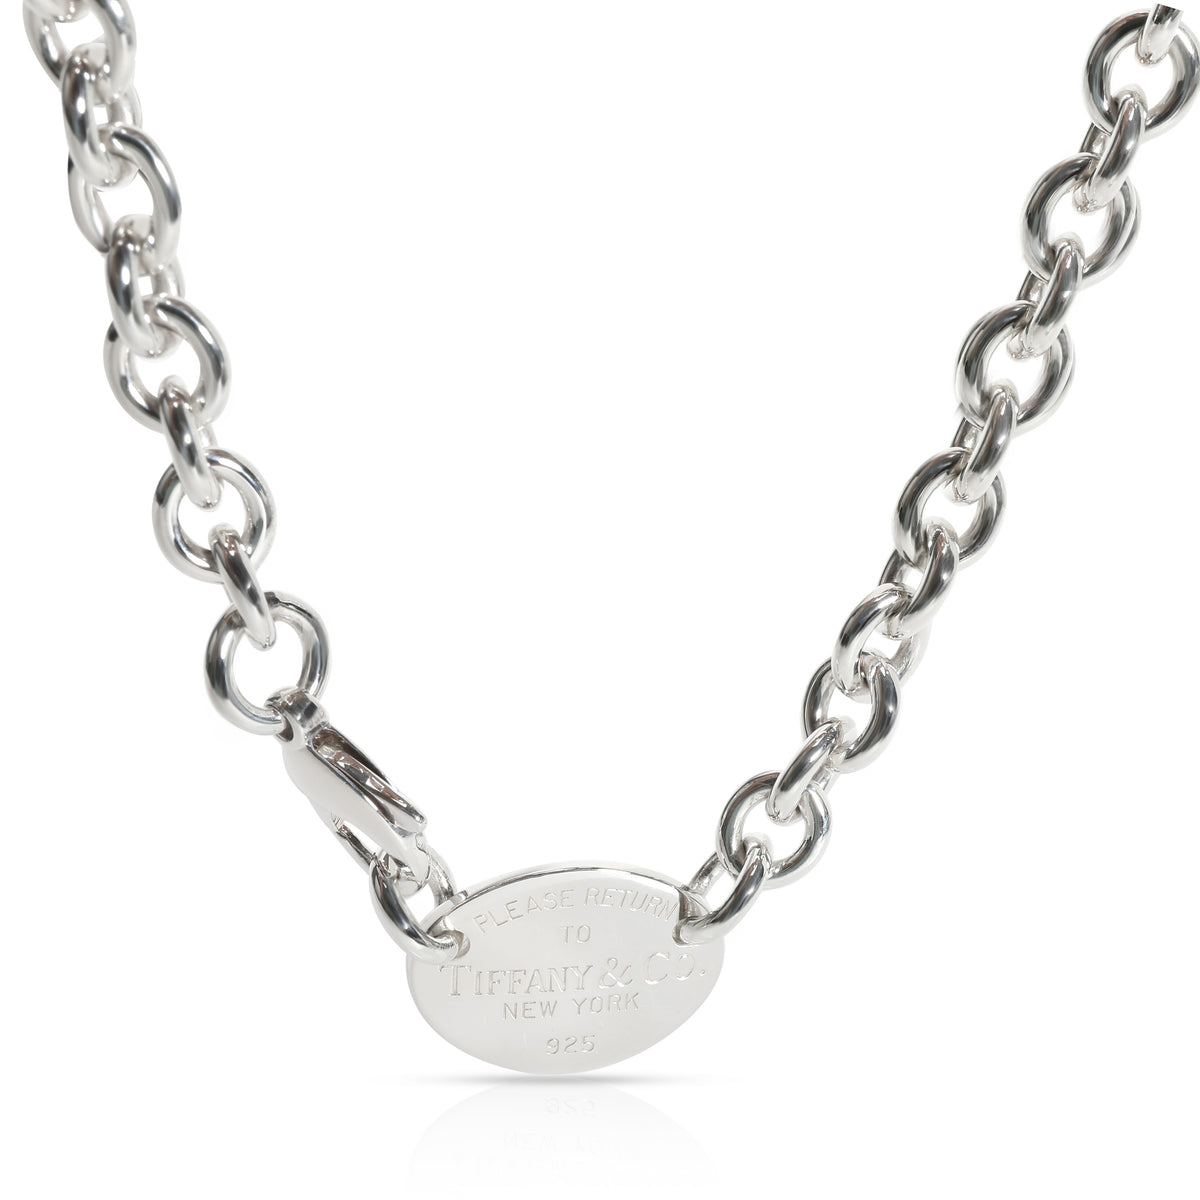 Tiffany & Co. Oval Return to Tiffany Choker Necklace in Sterling Silver